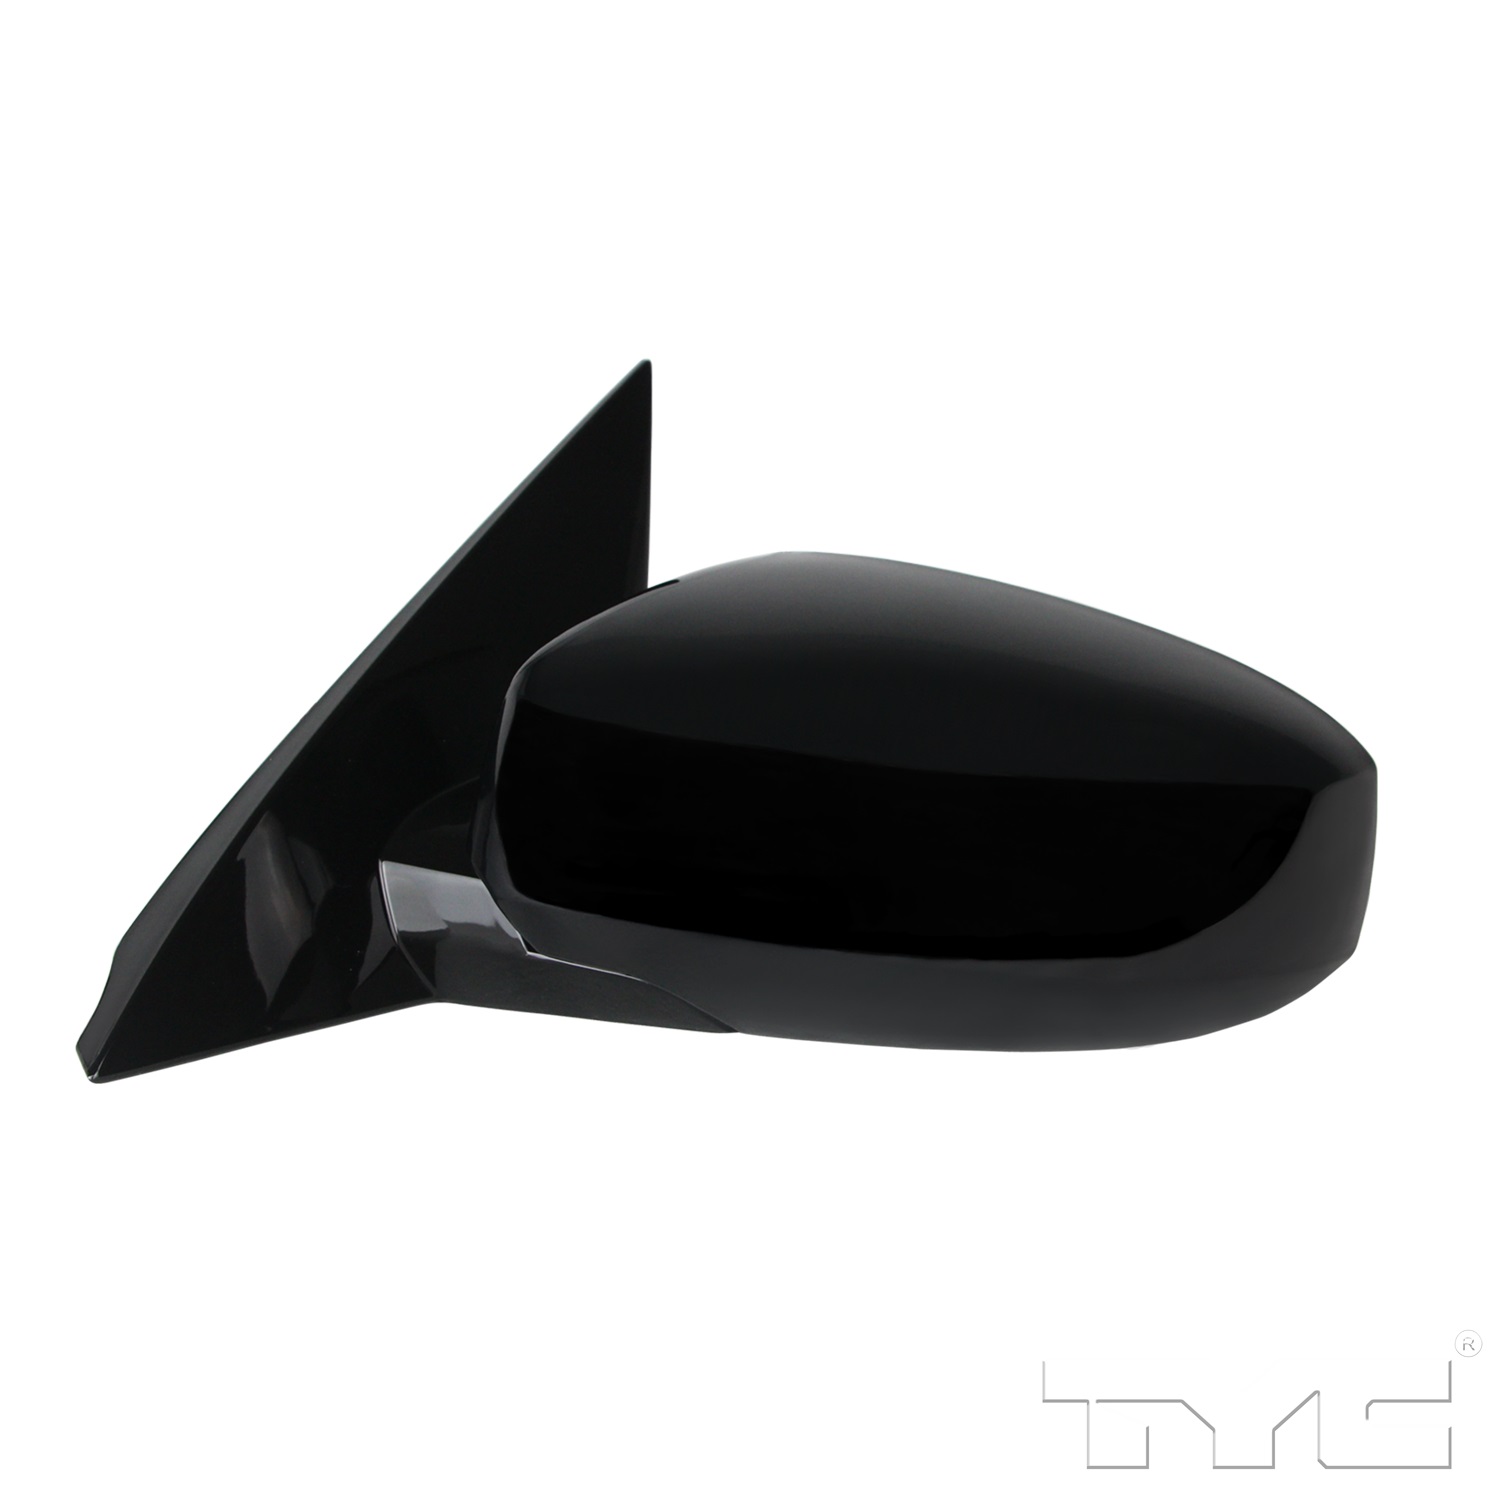 Aftermarket MIRRORS for NISSAN - MAXIMA, MAXIMA,04-08,LT Mirror outside rear view